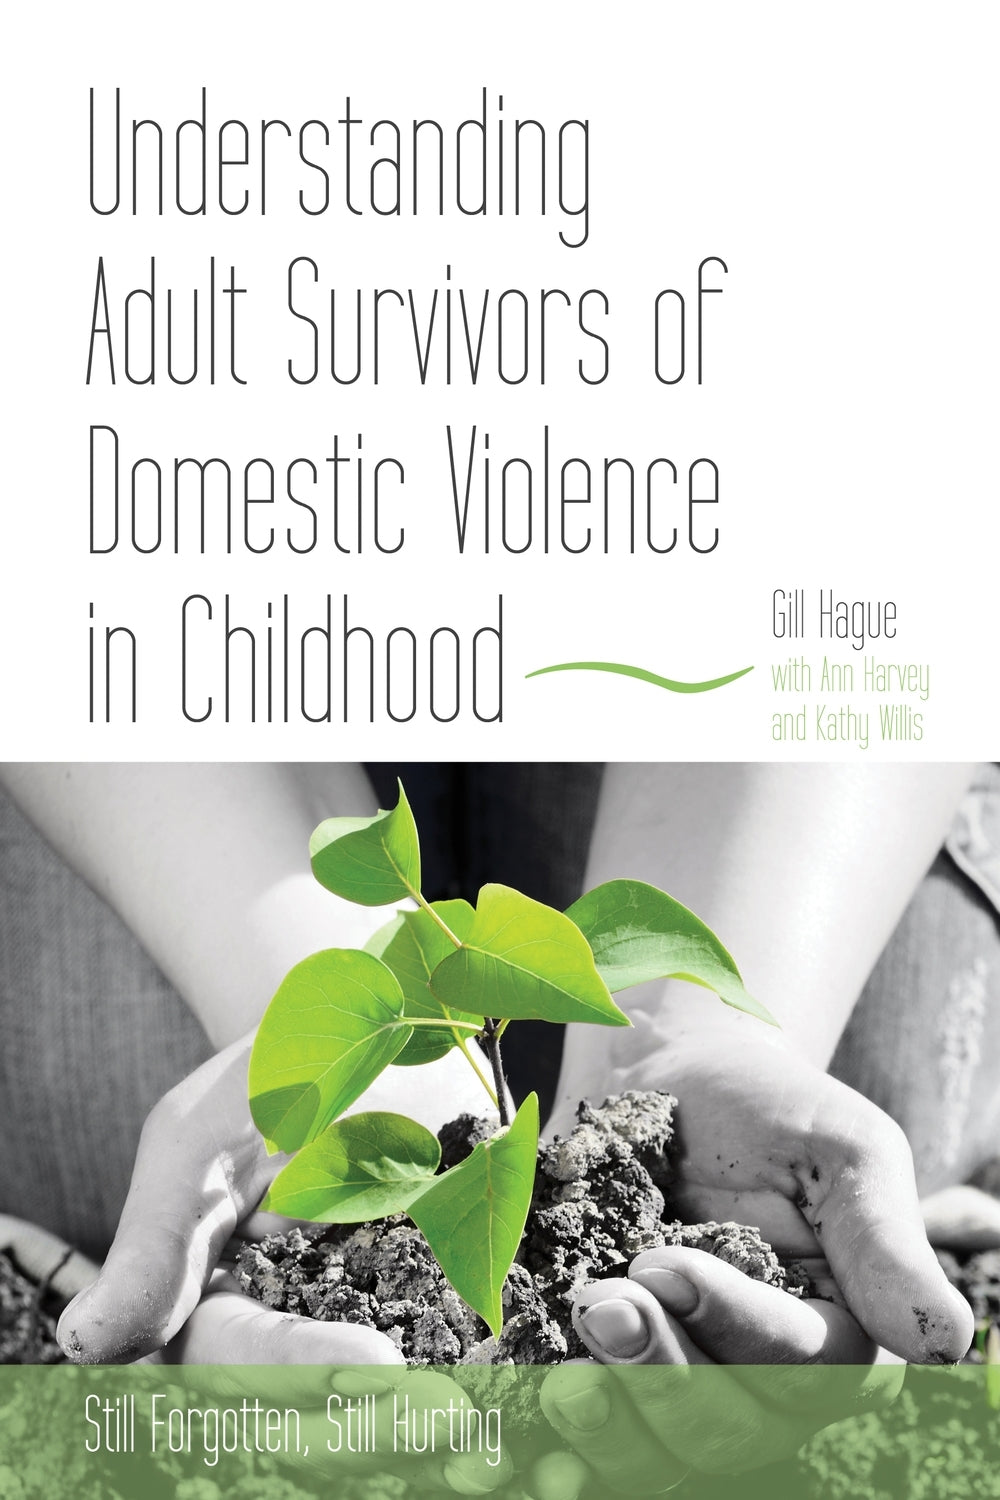 Understanding Adult Survivors of Domestic Violence in Childhood by Gill Hague